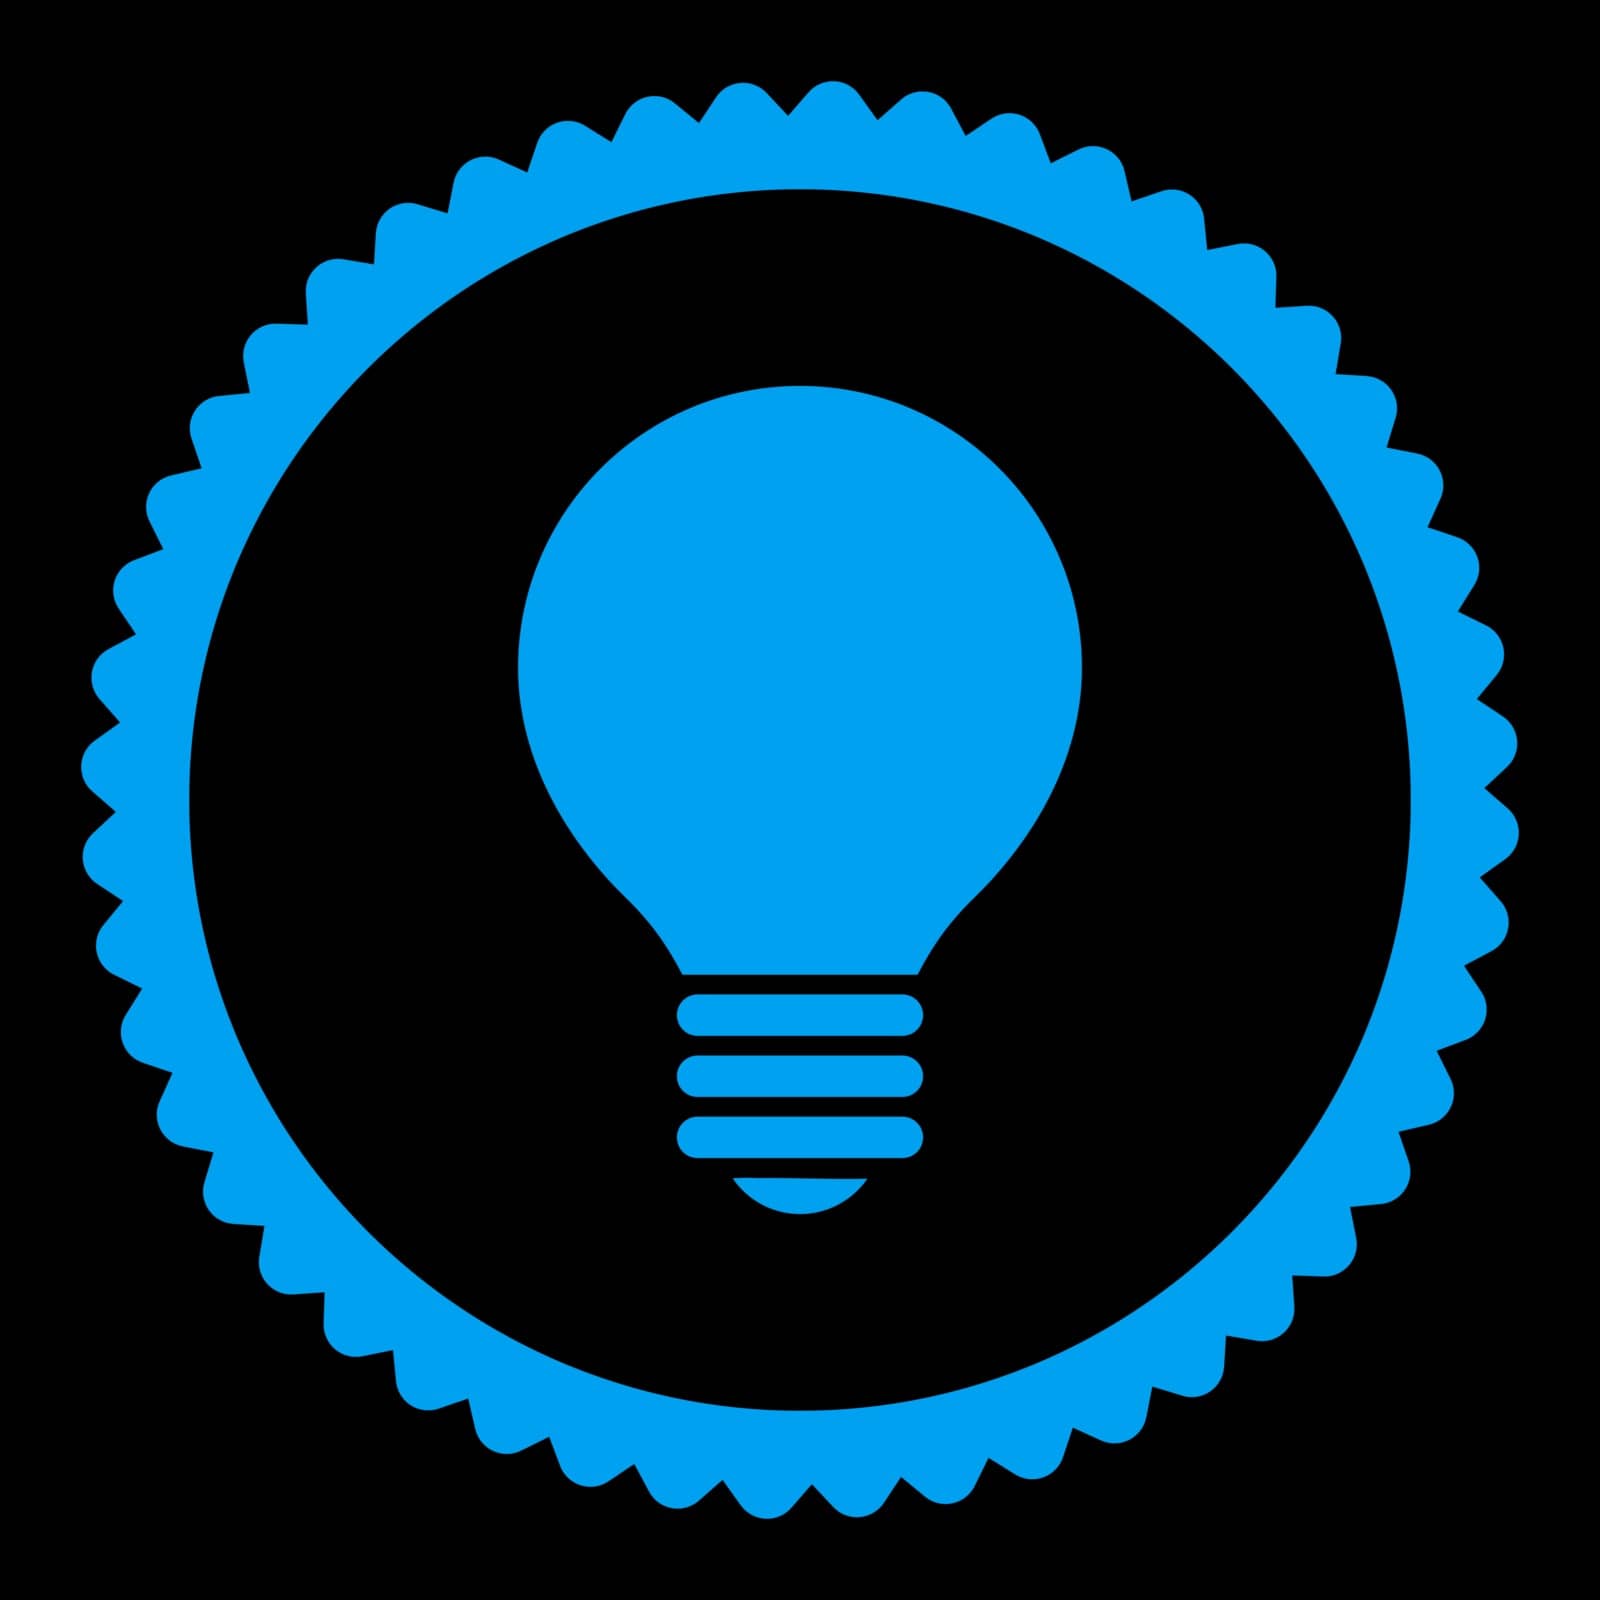 Electric Bulb round stamp icon. This flat vector symbol is drawn with blue color on a black background.